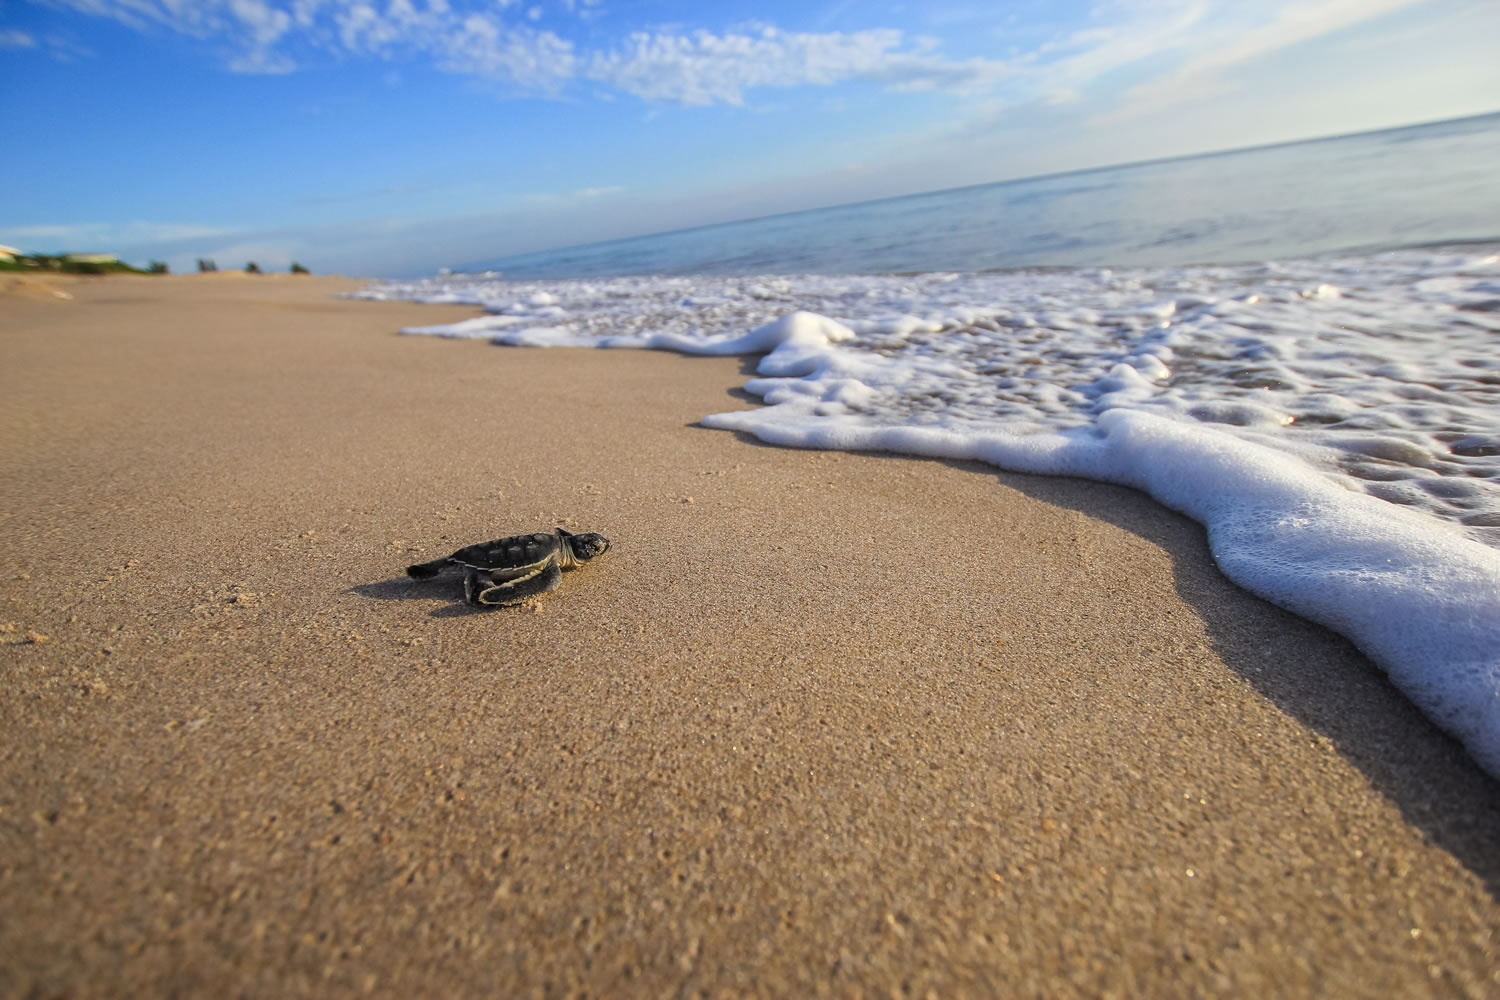 In this Aug. 13, 2015 photo made available by the University of Central Florida, a green turtle hatchling makes its way to the Atlantic Ocean at the Archie Carr Wildlife Refuge in Melbourne, Fla.  Florida's nesting season still has a month to go, but scientist have already counted a record 12,000 nests dug by endangered green turtles. Other turtles have also had a nesting comeback in Georgia, North Carolina and South Carolina.